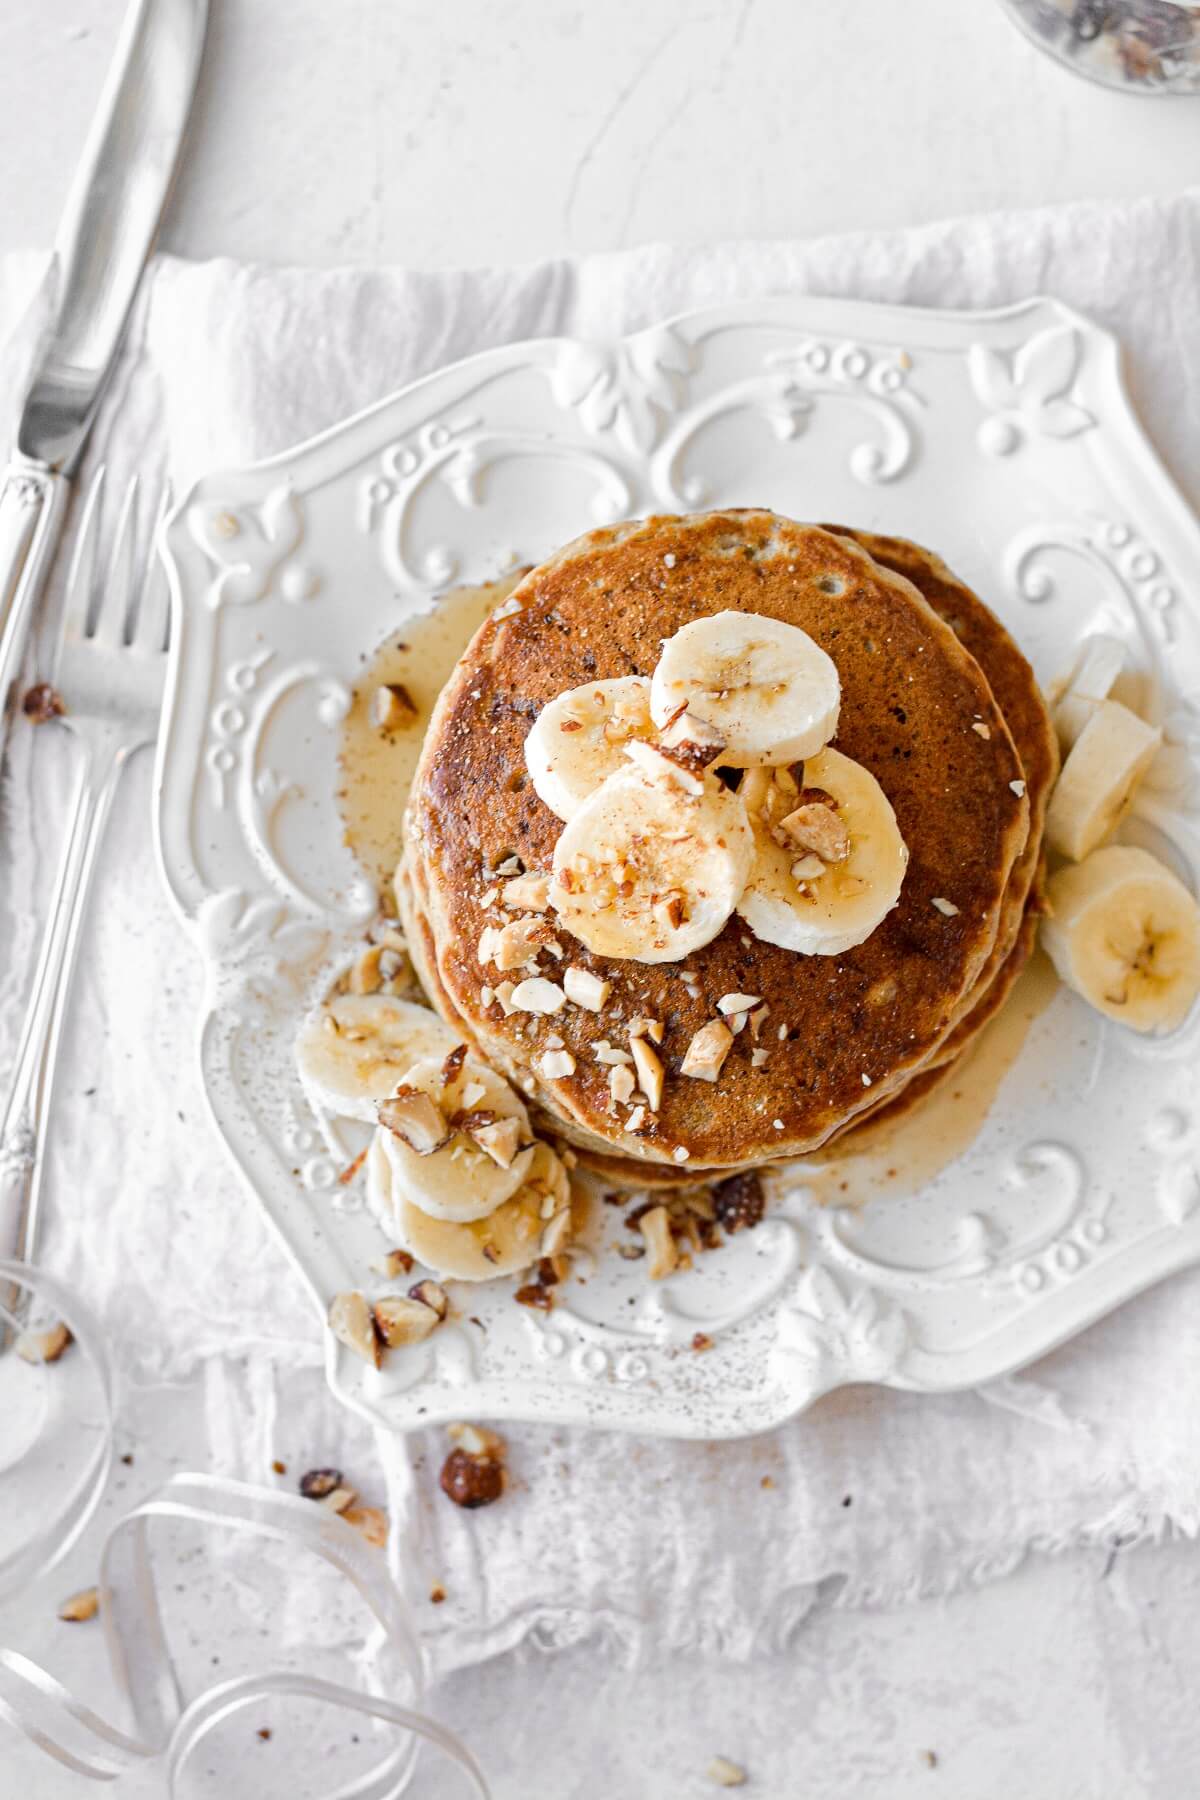 Banana bread pancakes, topped with bananas and almonds.